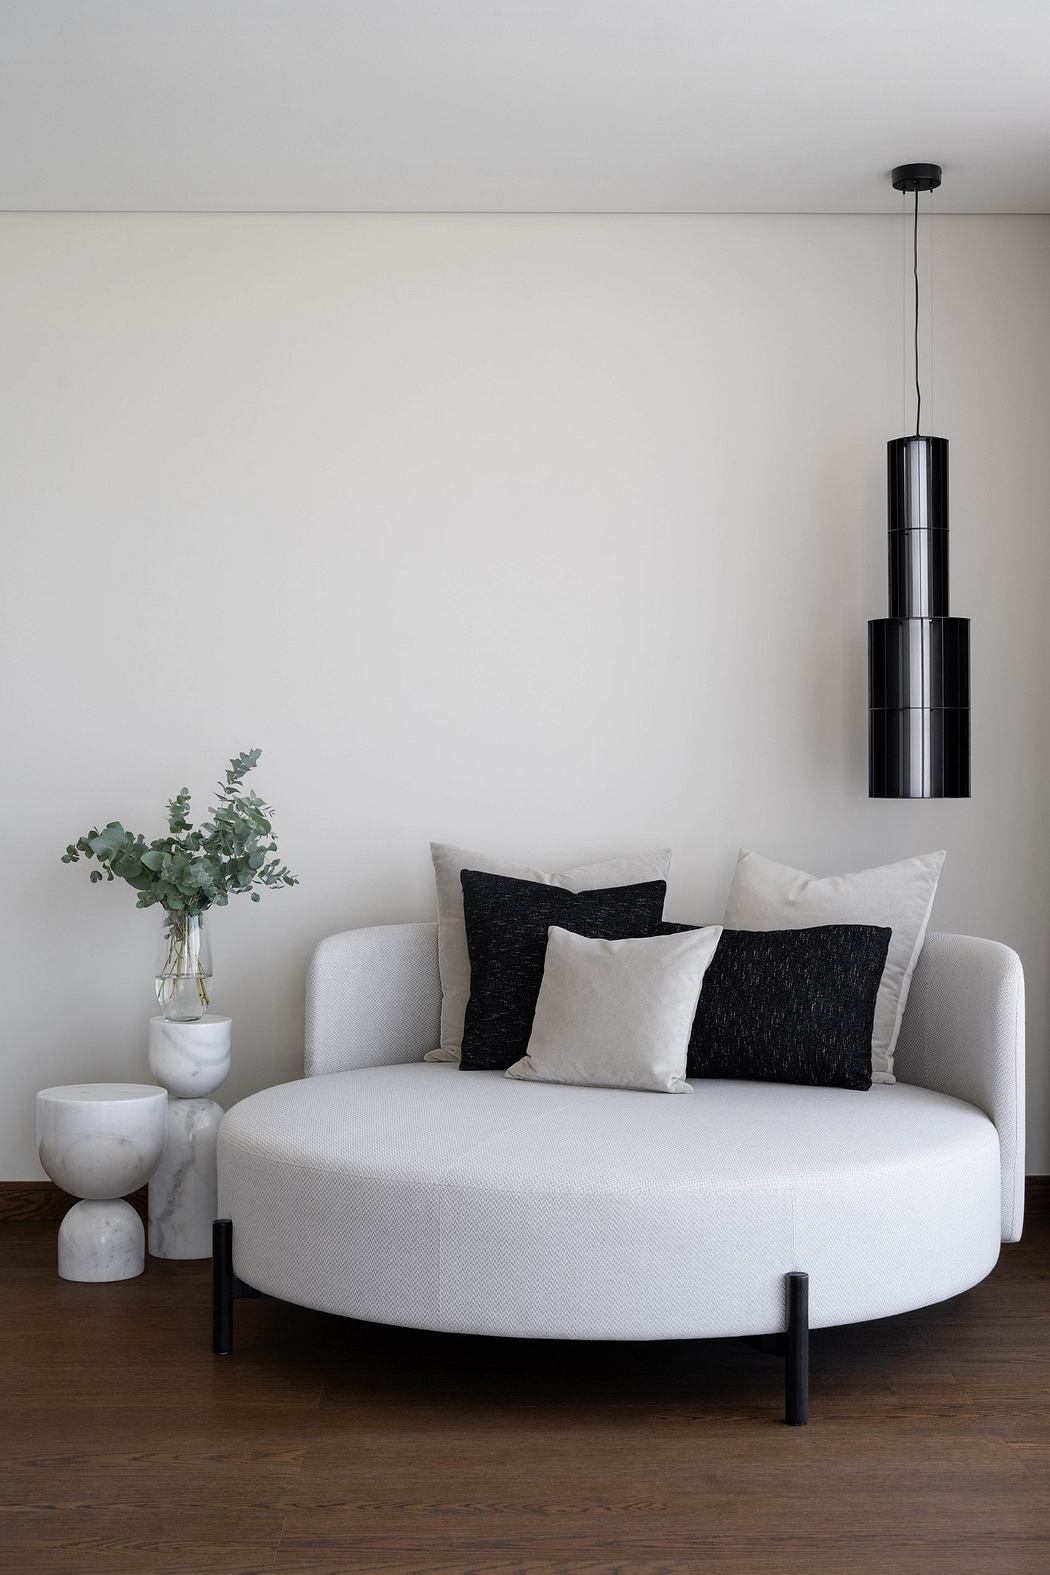 Minimalist living room with white sofa, pendant light, and plant.